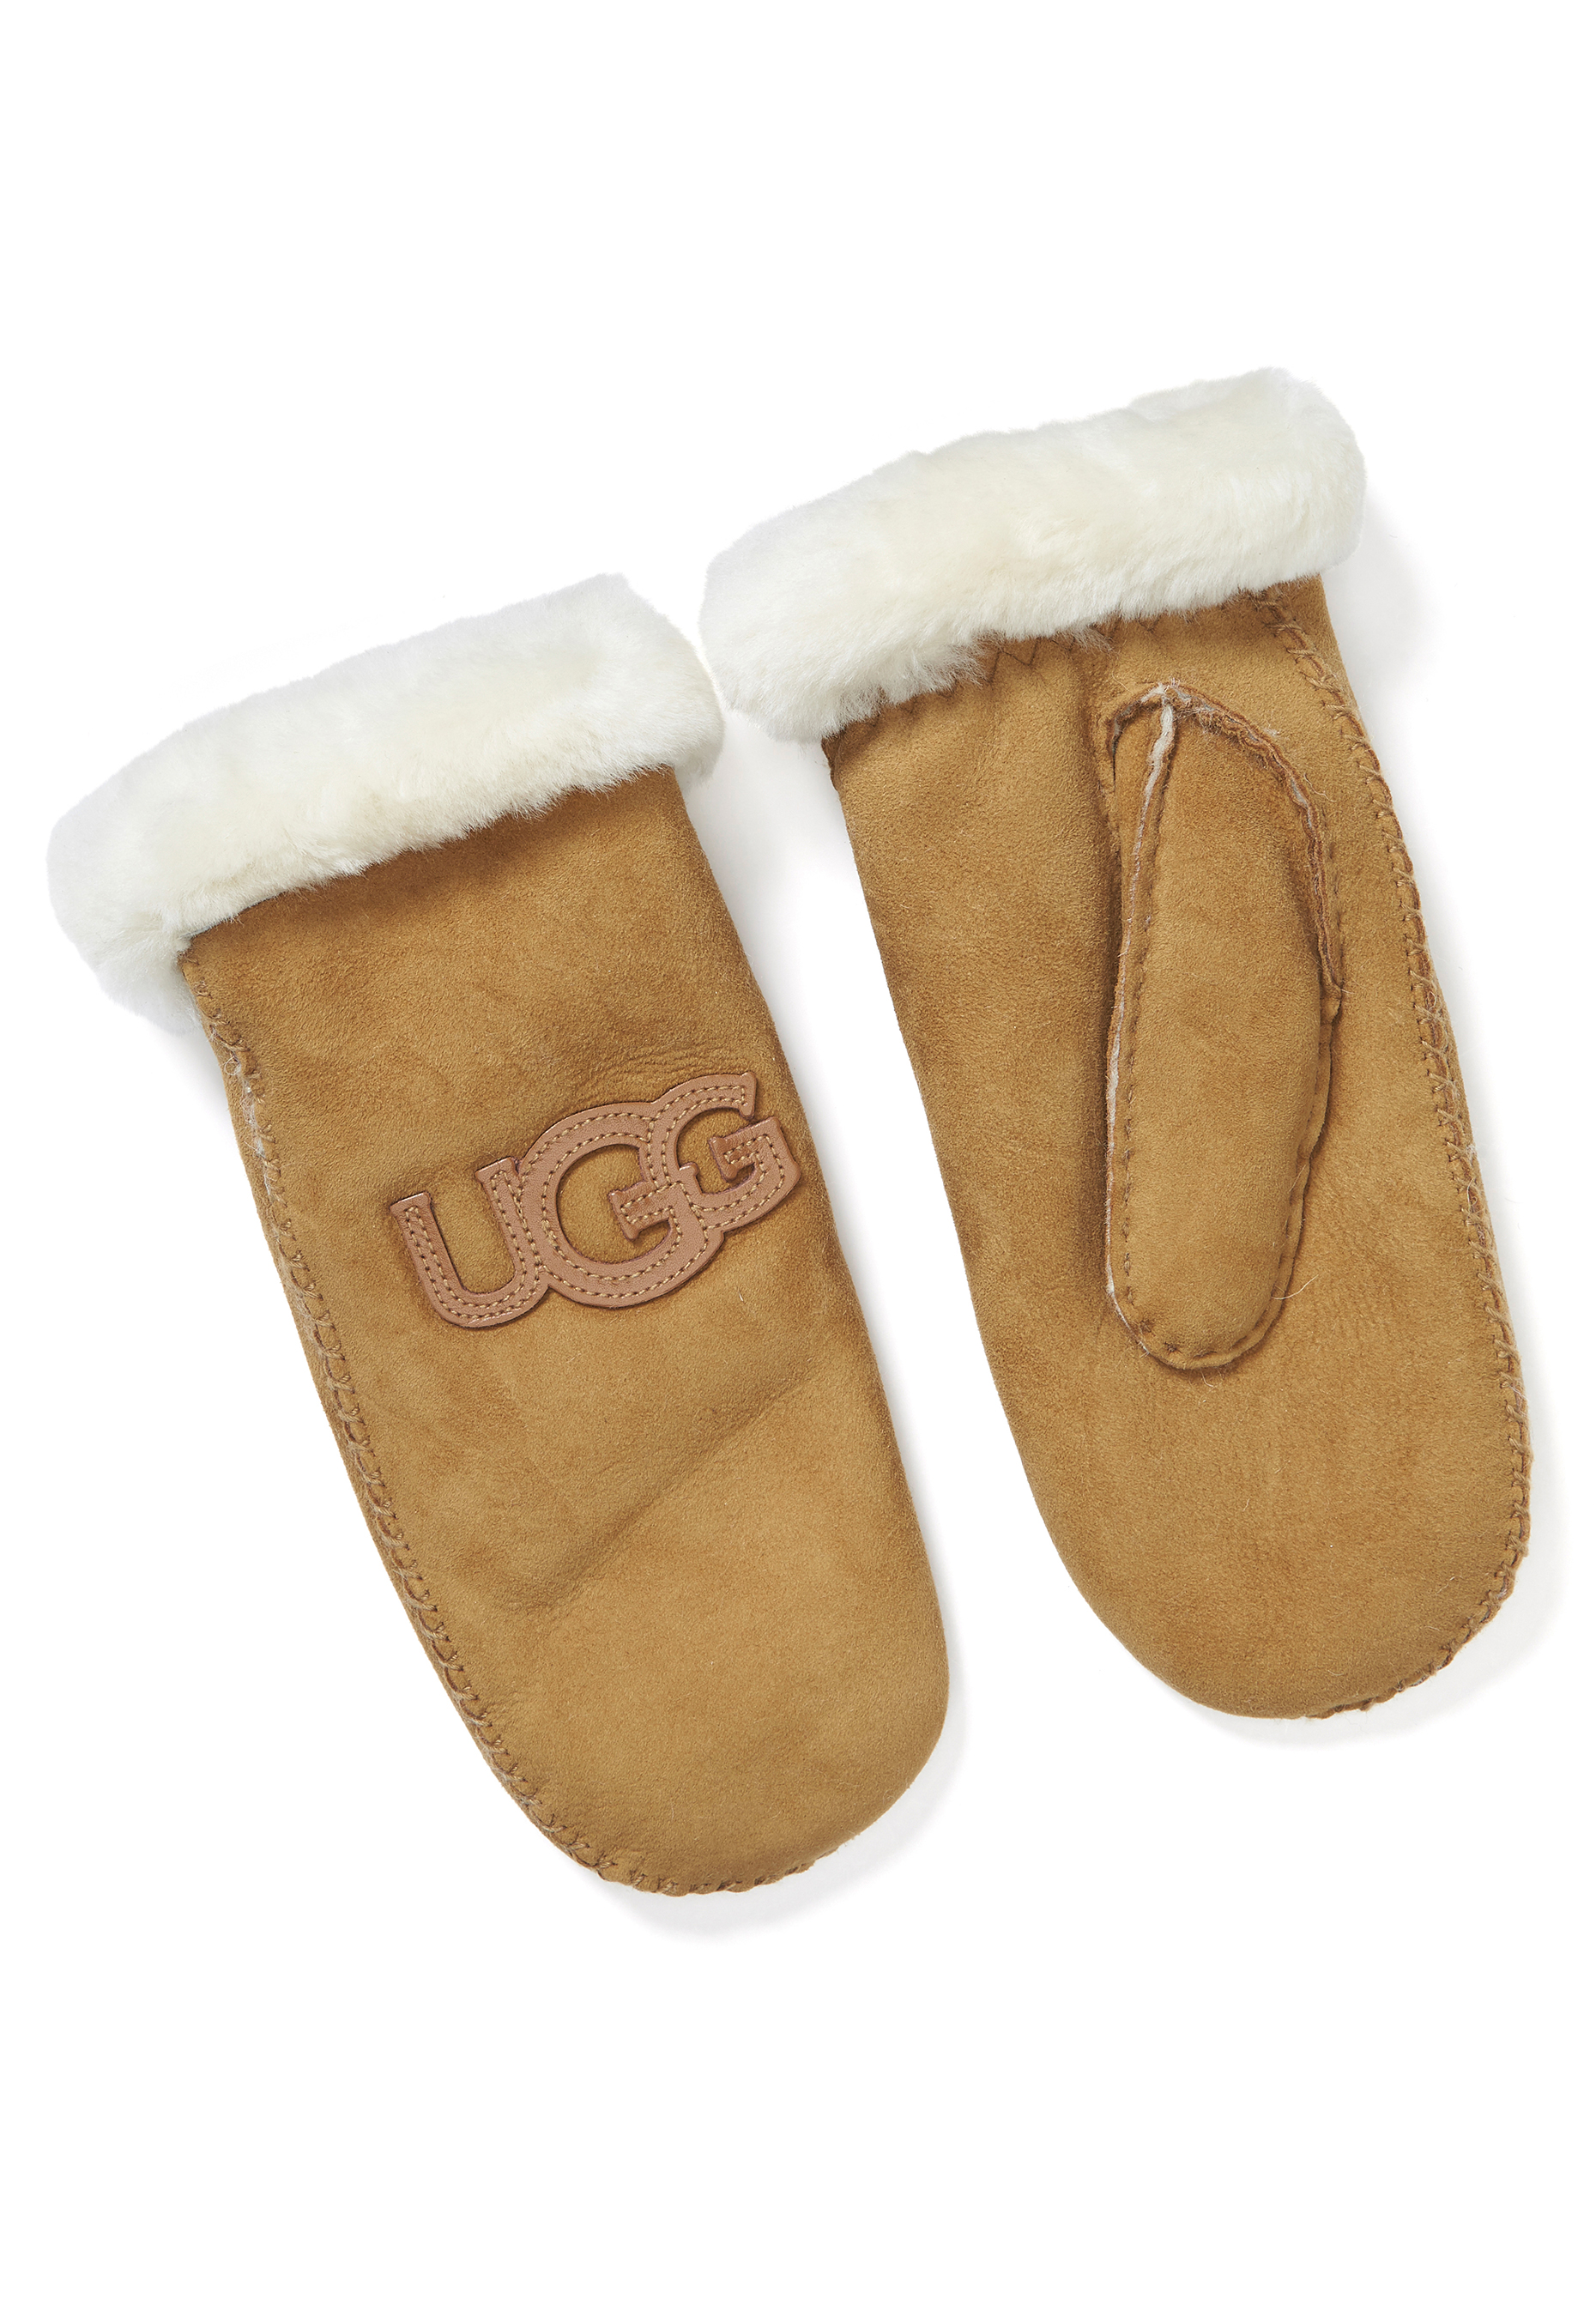 how to clean chestnut uggs